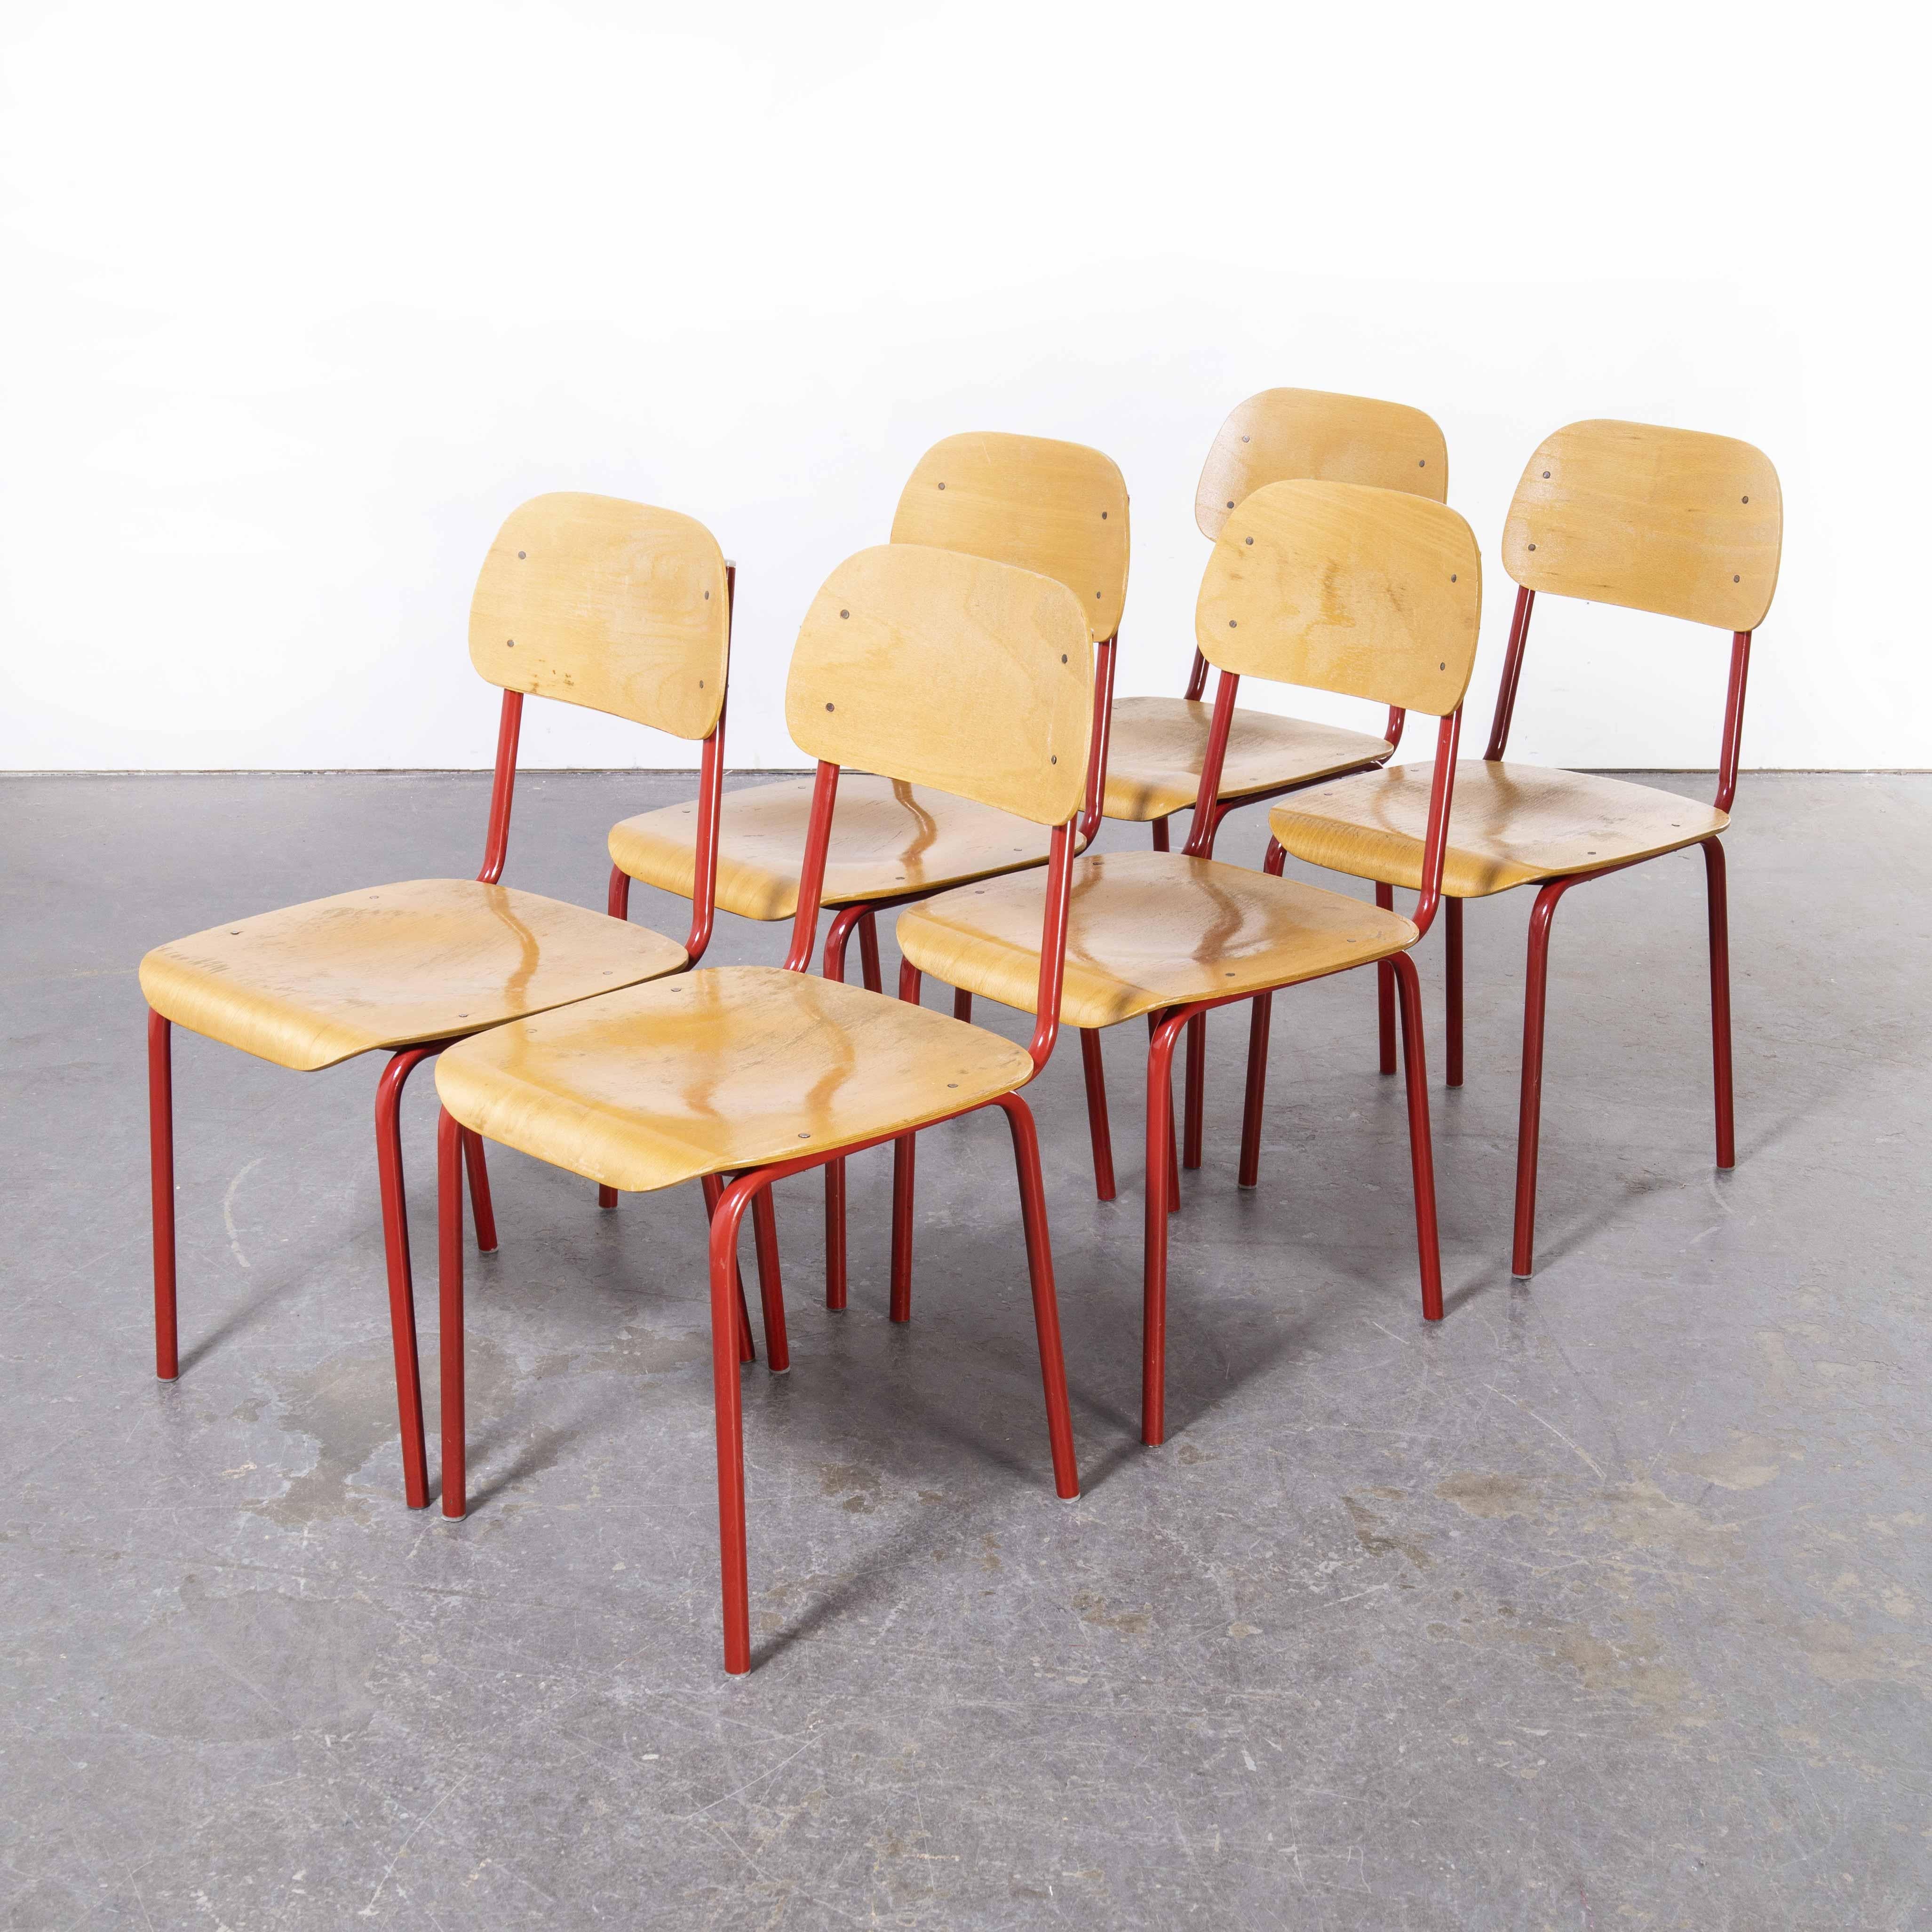 1970’s Czech industrial stacking chairs – red – set of six
1970’s Czech industrial stacking chairs – red – set of six. Robust industrial style chairs typically used in schools and commercial venues in the Czech republic. Good weight steel frames